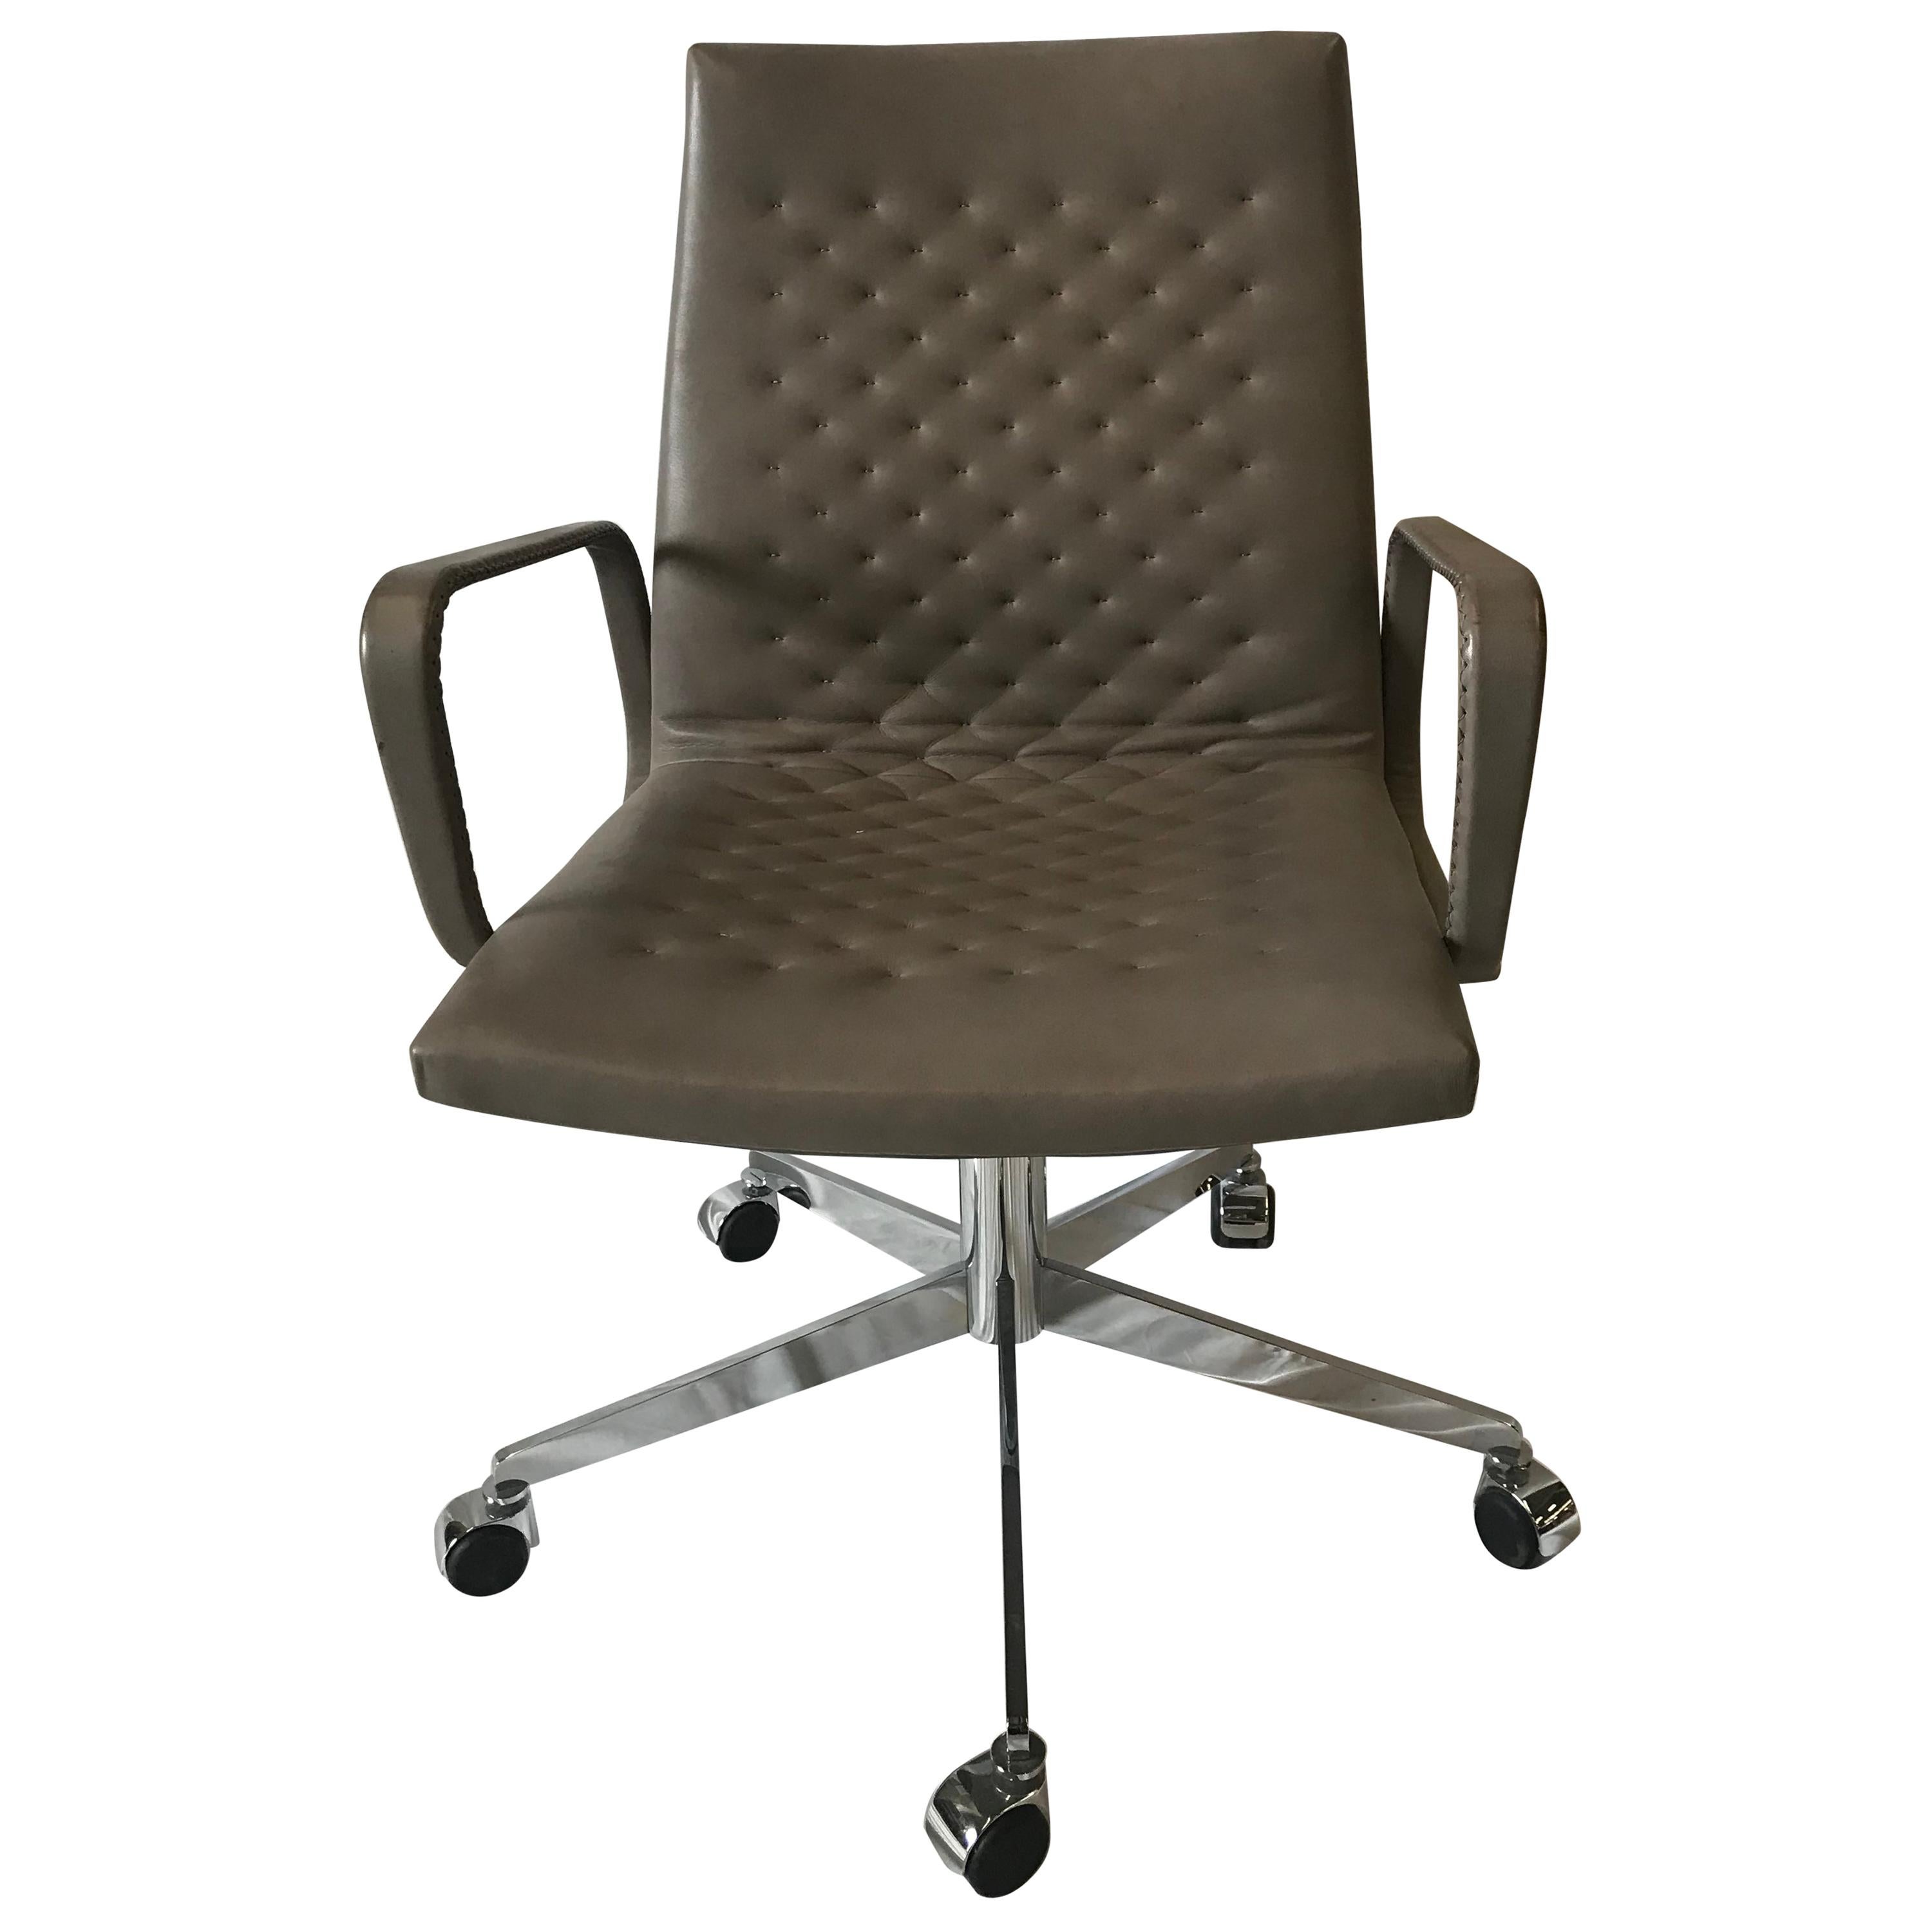 De Sede DS-1051 Conference Chair, Taupe Leather and Chrome Base